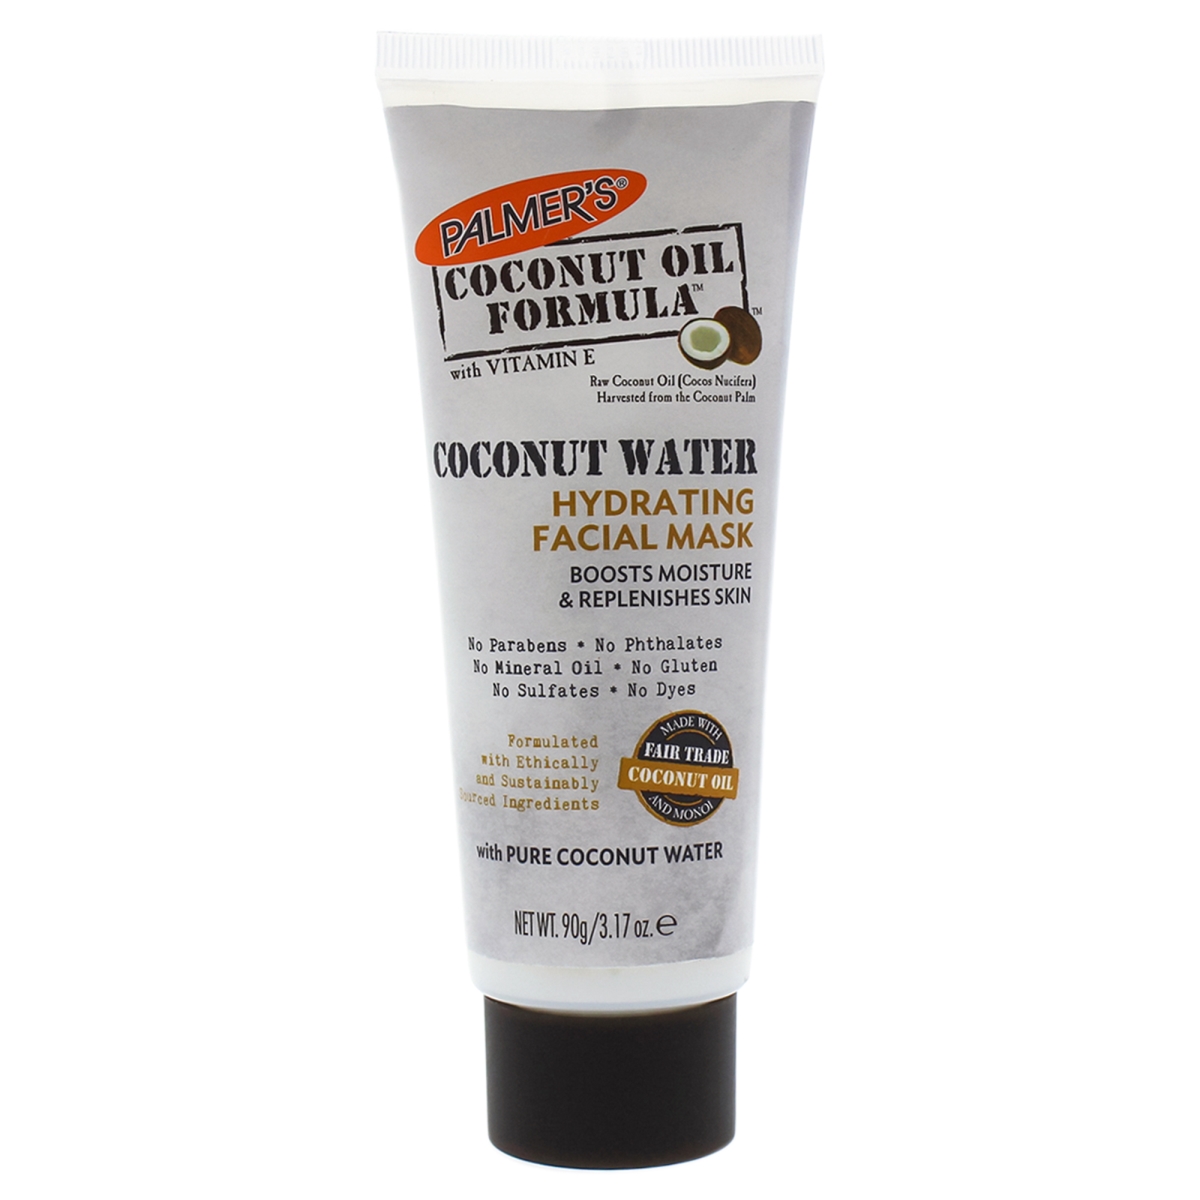 I0088433 Coconut Water Hydrating Facial Mask For Unisex - 3.17 Oz